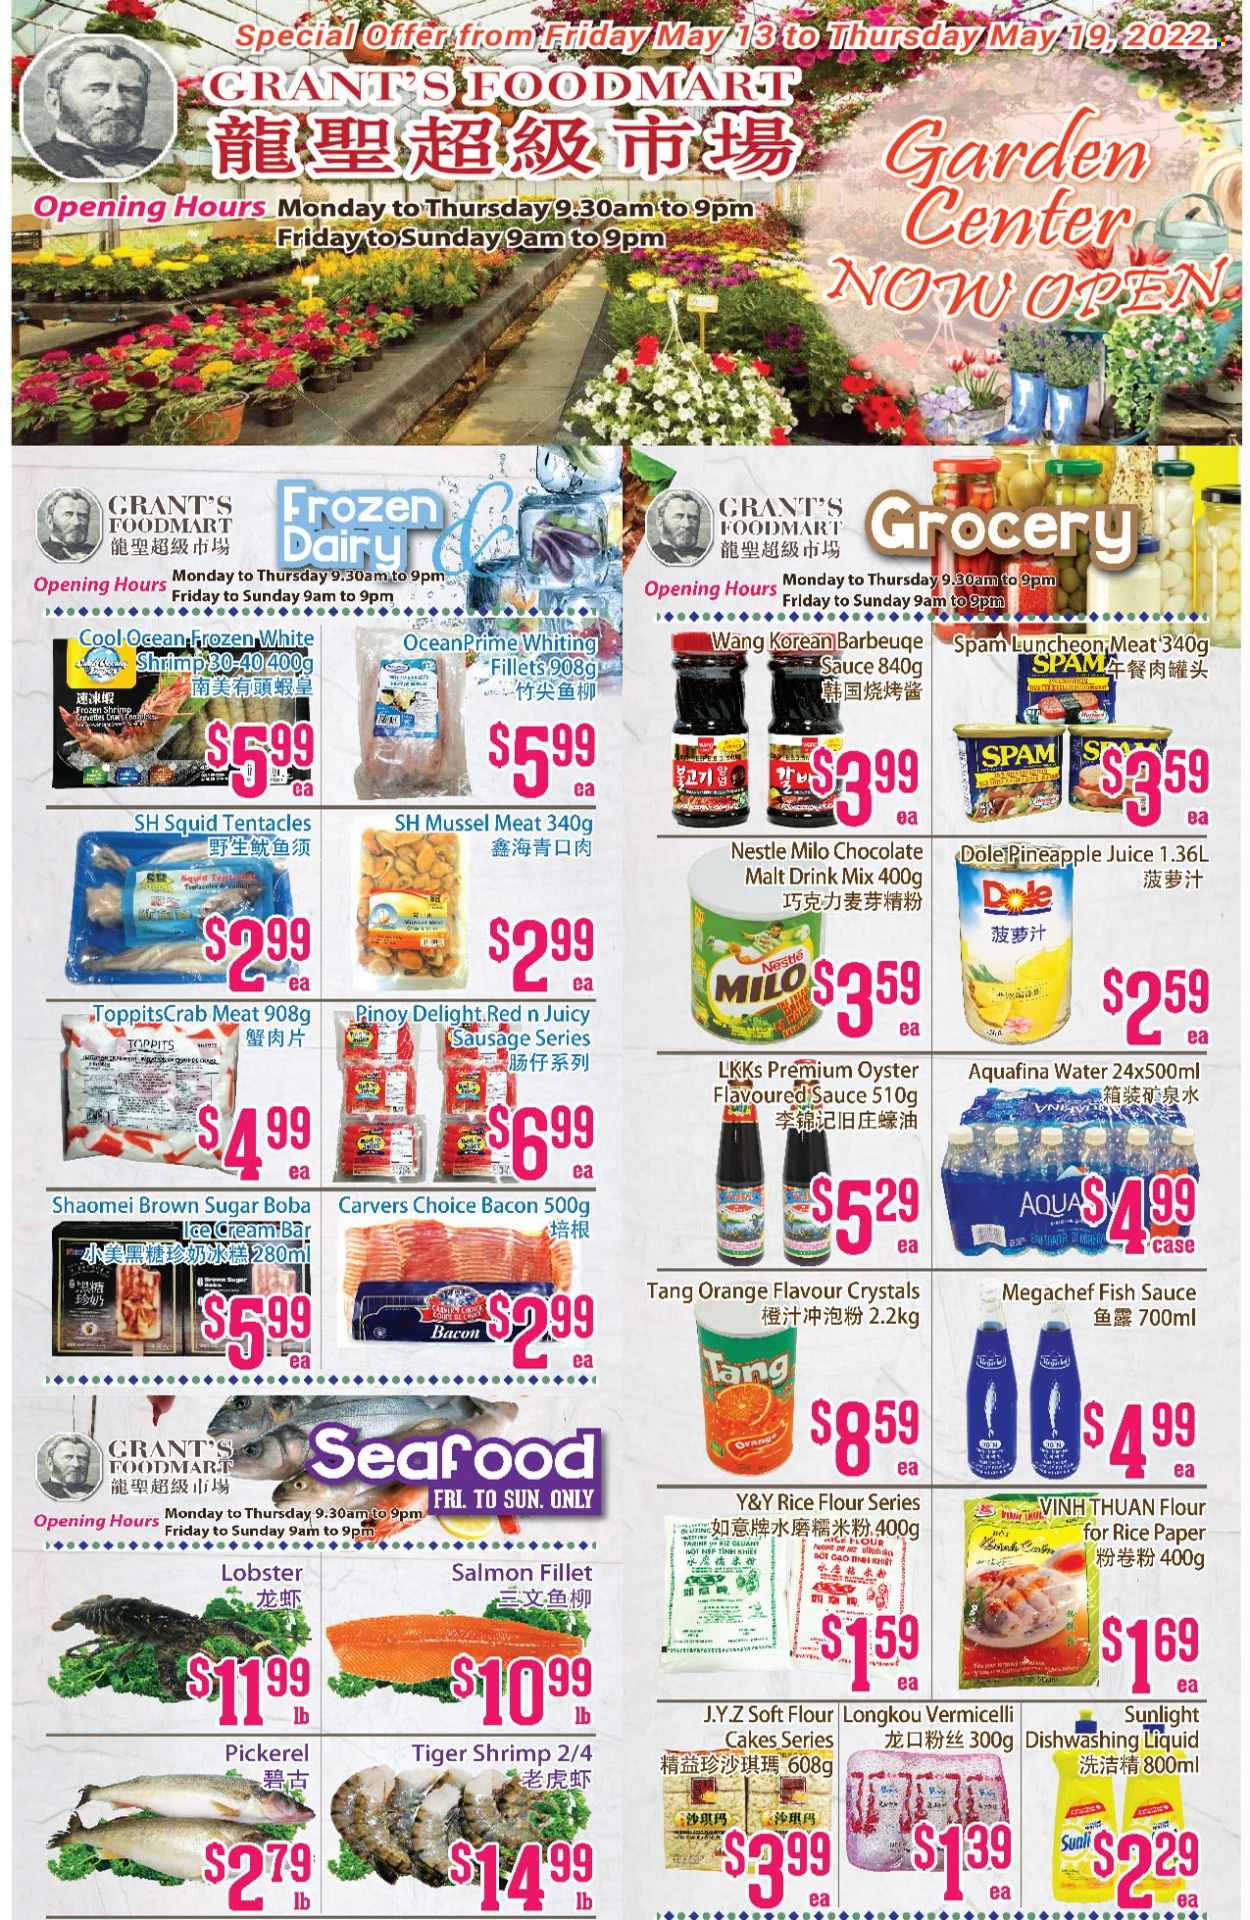 thumbnail - Grant's Foodmart Flyer - May 13, 2022 - May 19, 2022 - Sales products - cake, Dole, pineapple, lobster, mussels, salmon, salmon fillet, squid, oysters, fish, shrimps, whiting fillets, whiting, walleye, sauce, bacon, sausage, Spam, lunch meat, Milo, chocolate, cane sugar, flour, rice flour, fish sauce, pineapple juice, juice, Aquafina, tea, Grant's, Sunlight, dishwashing liquid, Nestlé, oranges. Page 2.